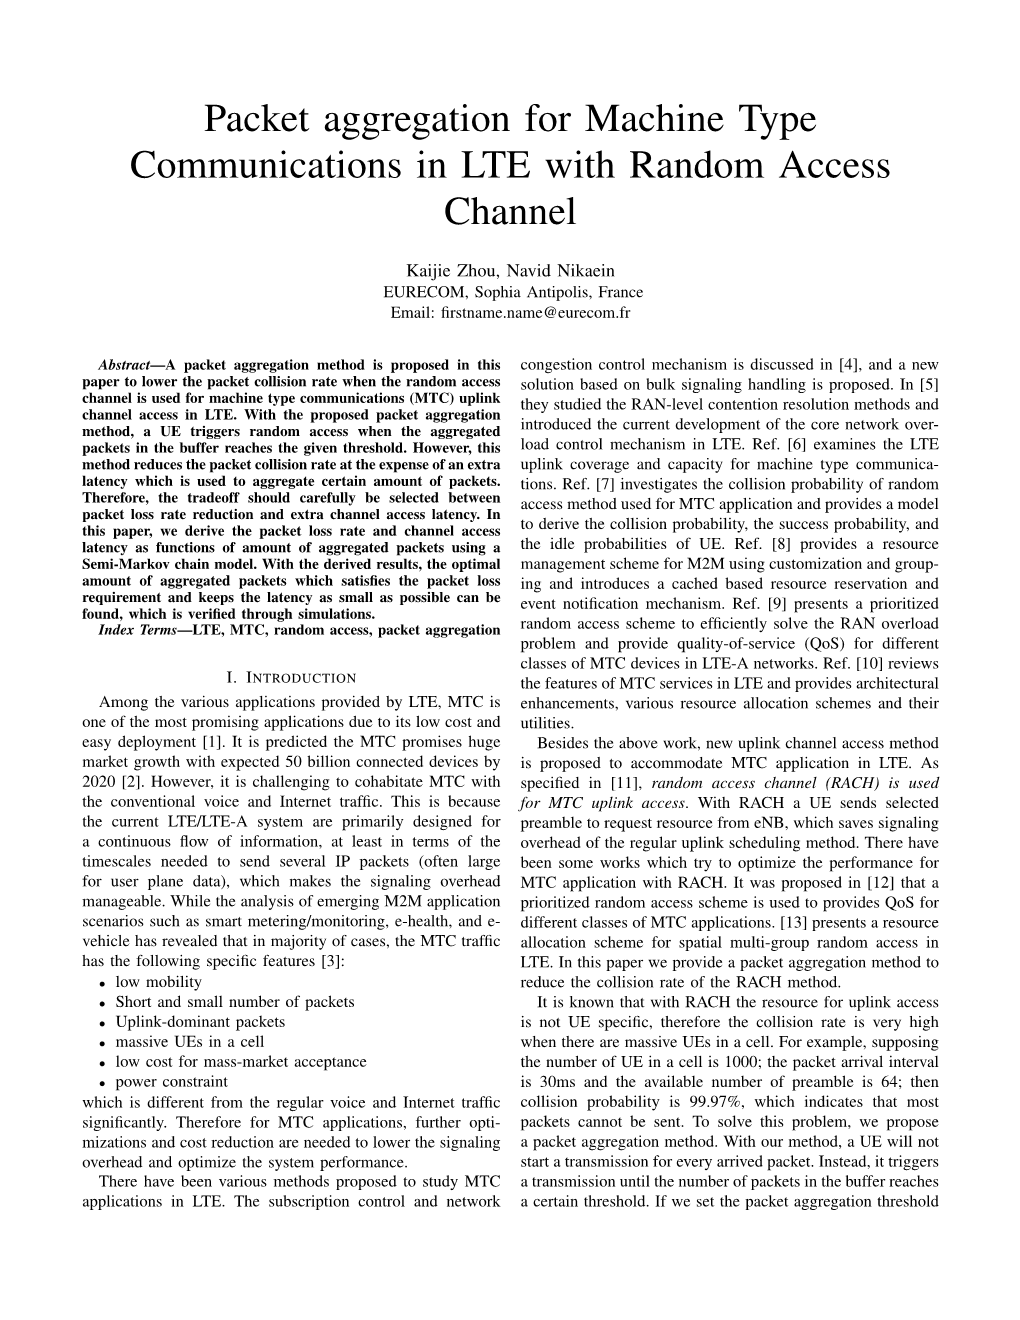 Packet Aggregation for Machine Type Communications in LTE with Random Access Channel